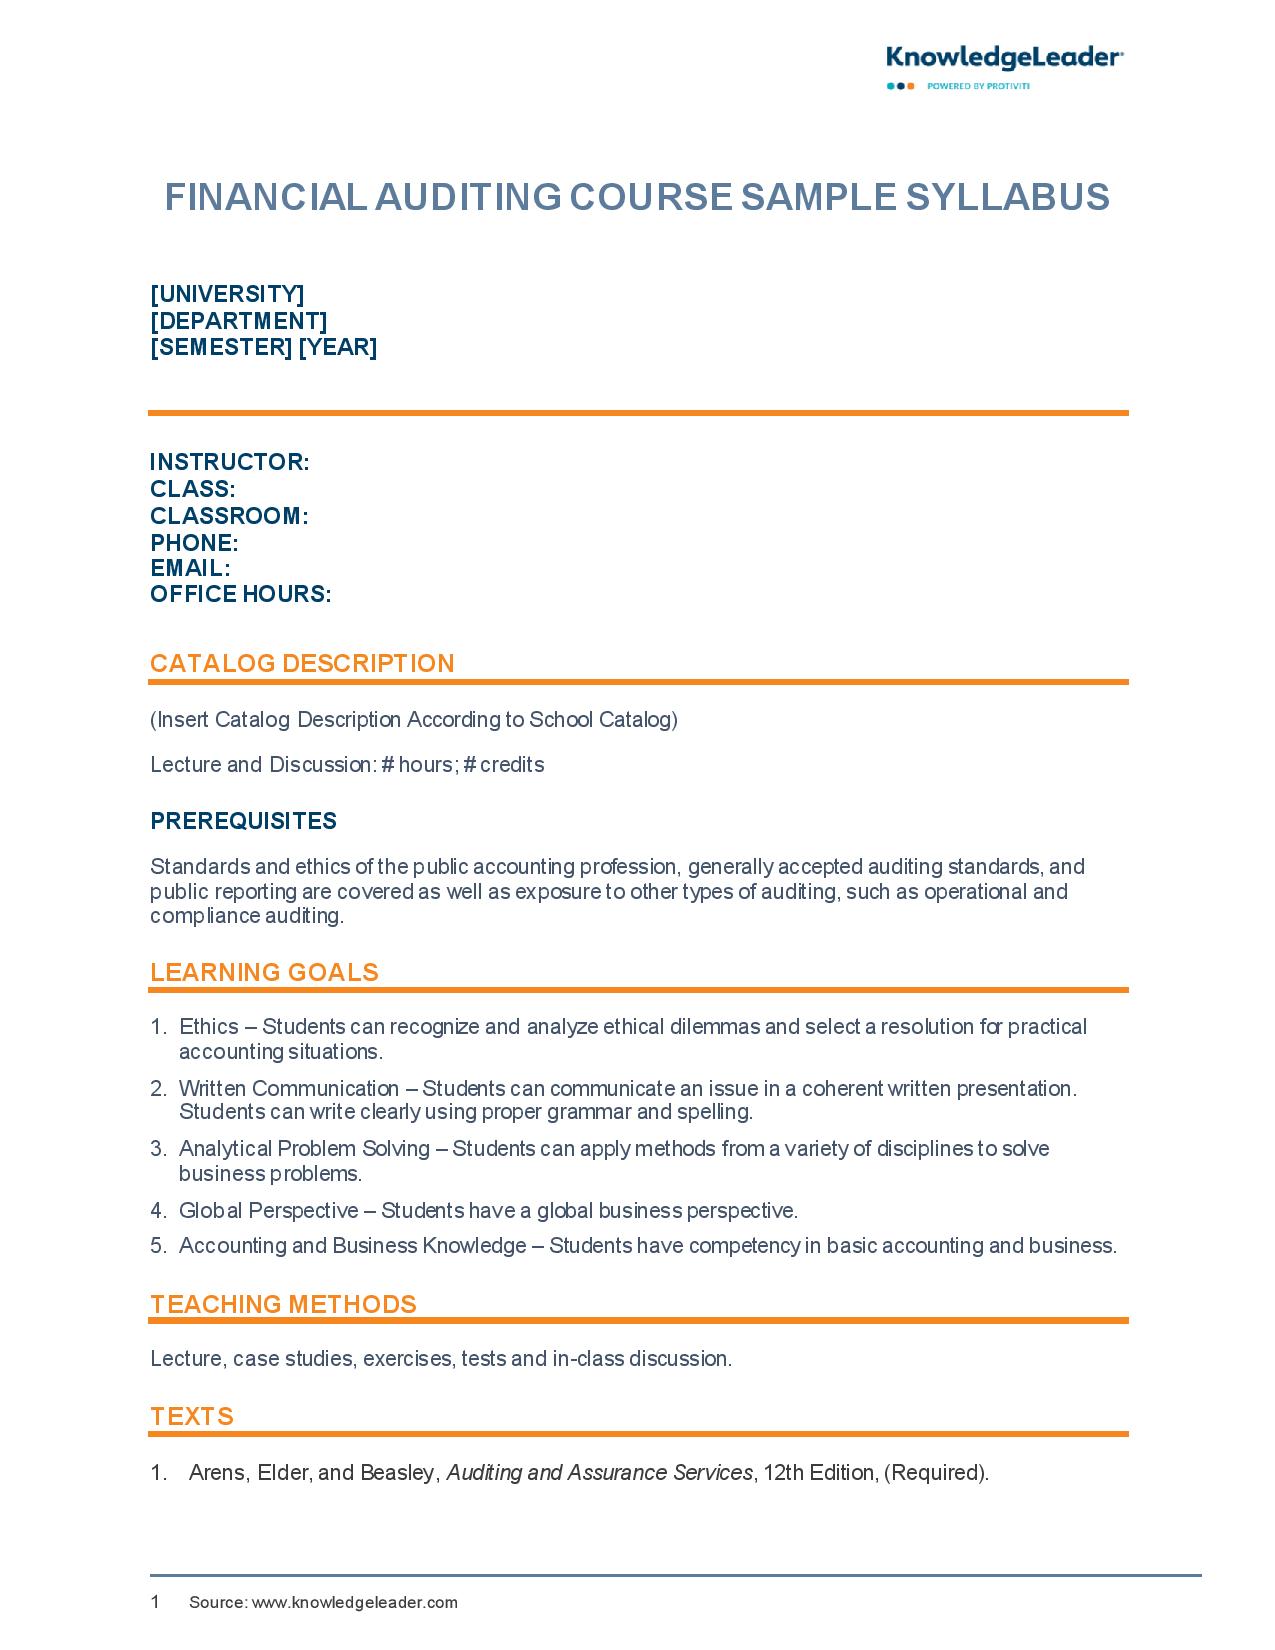 Screenshot of the first page of Financial Auditing Course Sample Syllabus